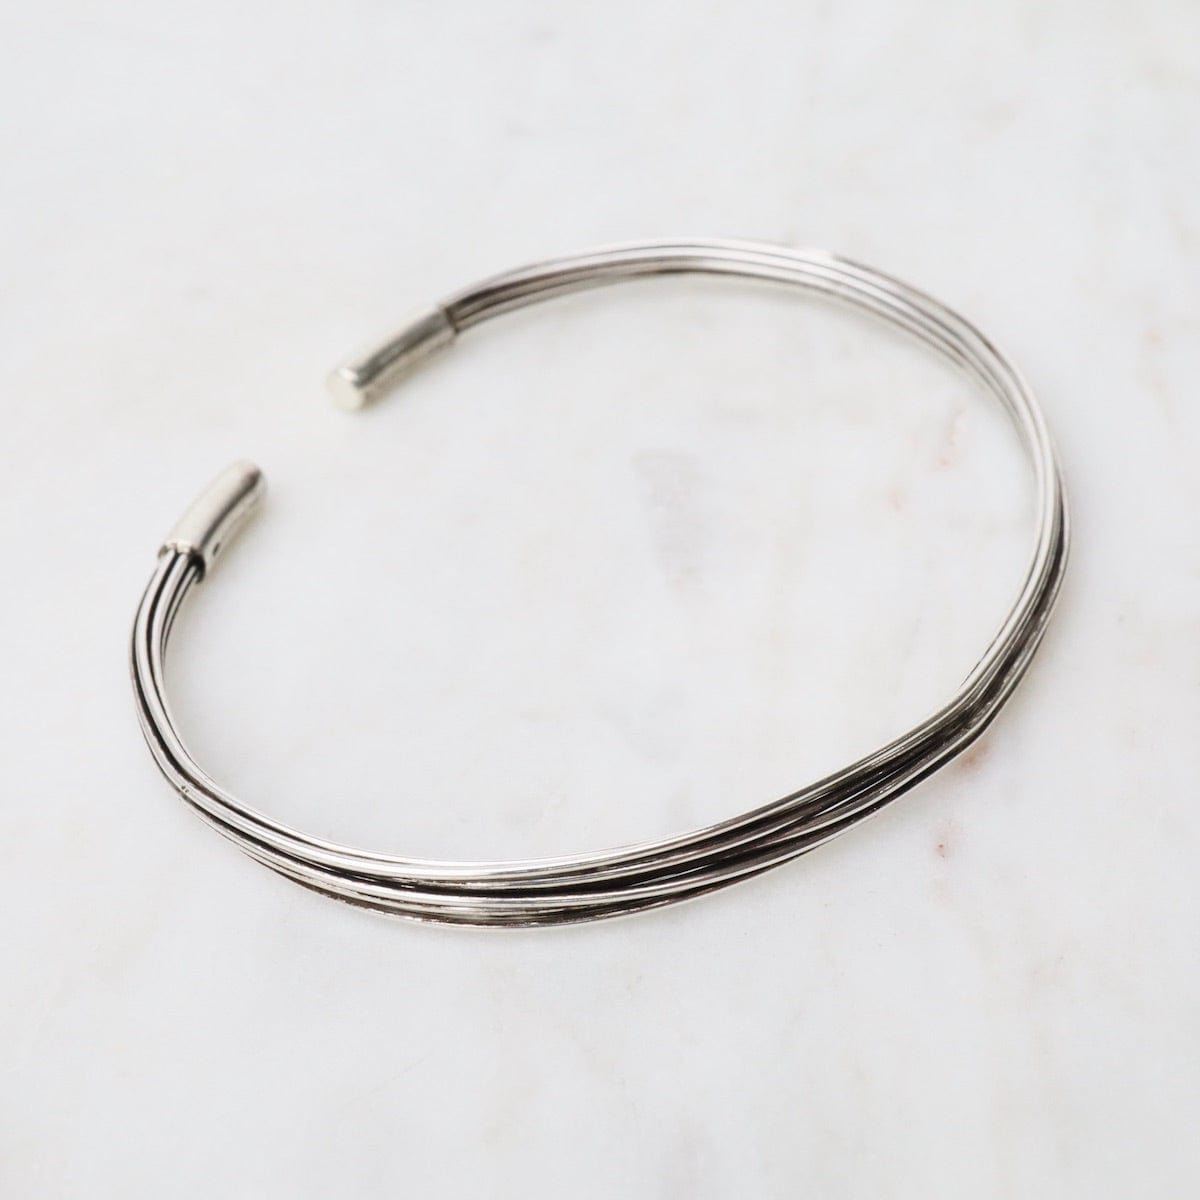 BRC Elephant Hair Inspired Cuff - Oxidized Sterling Silver - 10 Lines